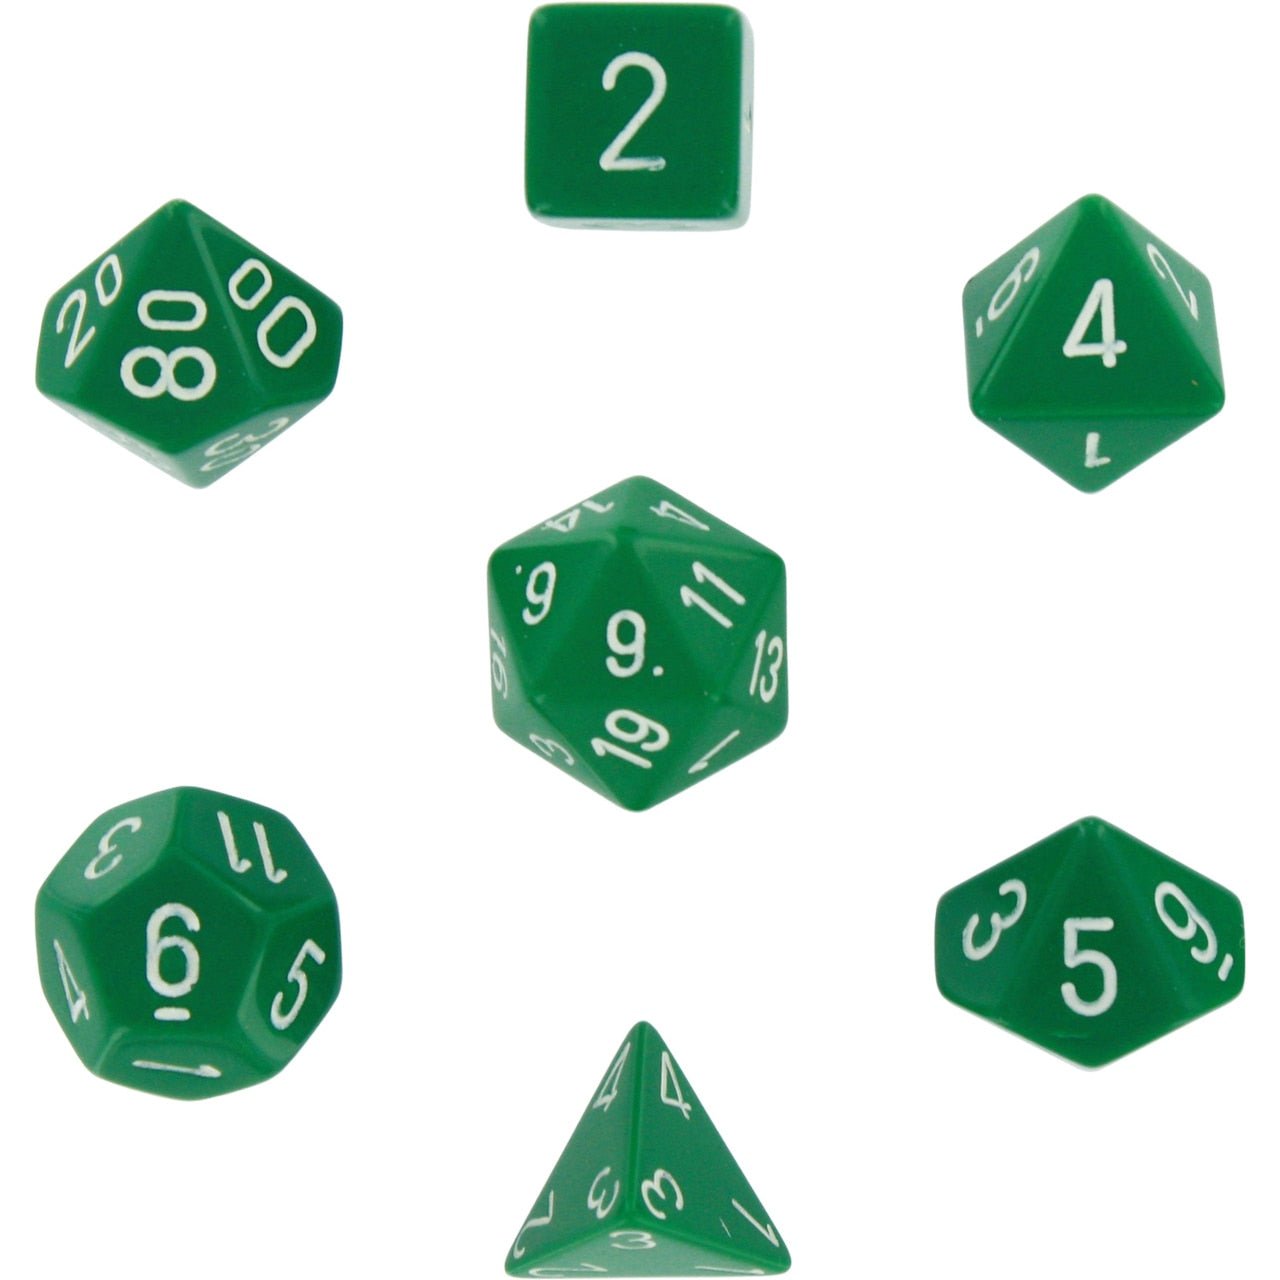 Chessex Dice: 7 Die Set - Opaque - Green with White (CHX 25405) - Gamescape